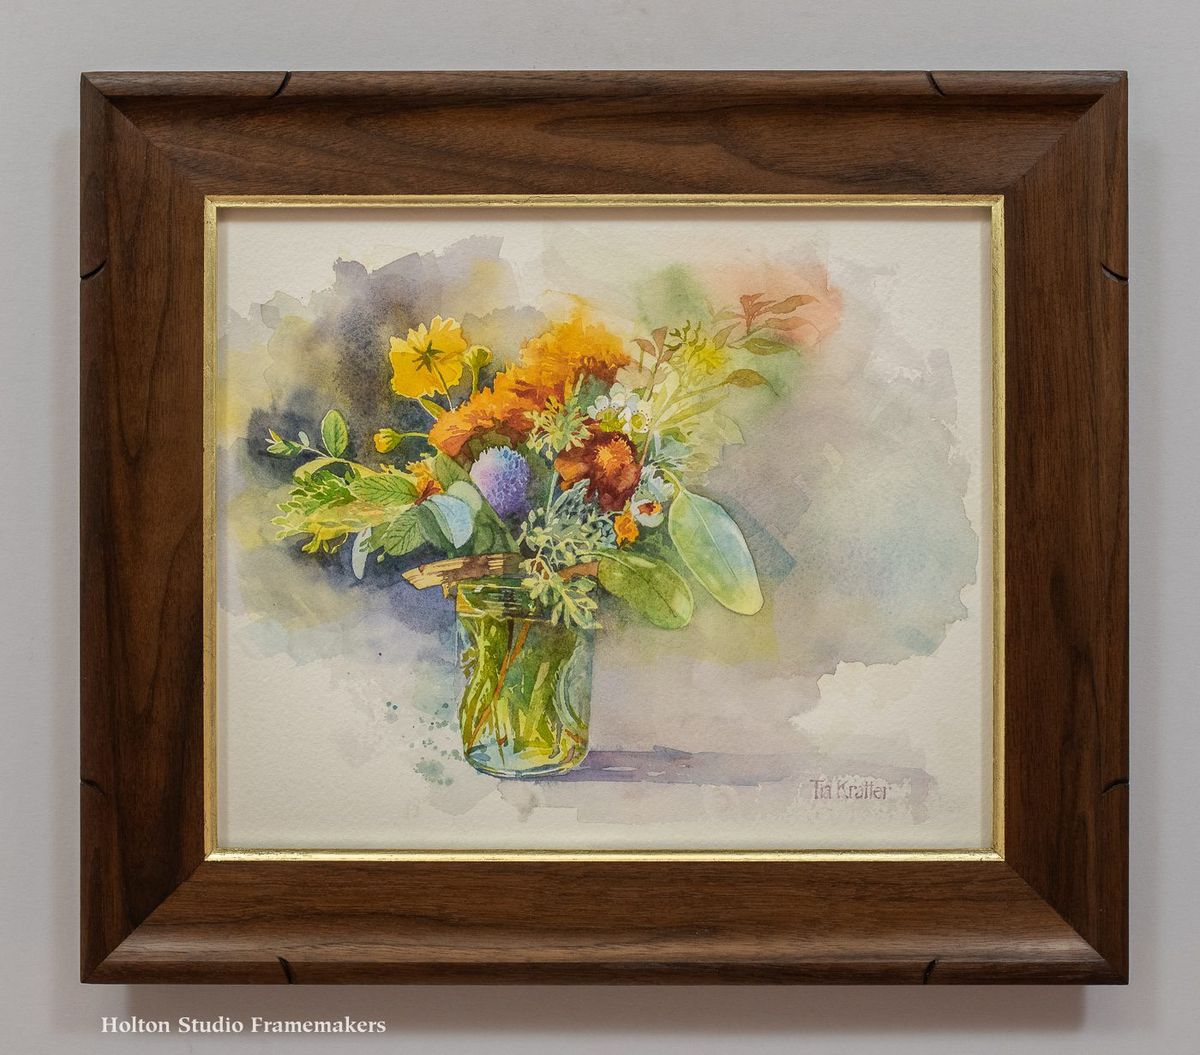 California Wildflowers: A group exhibition 